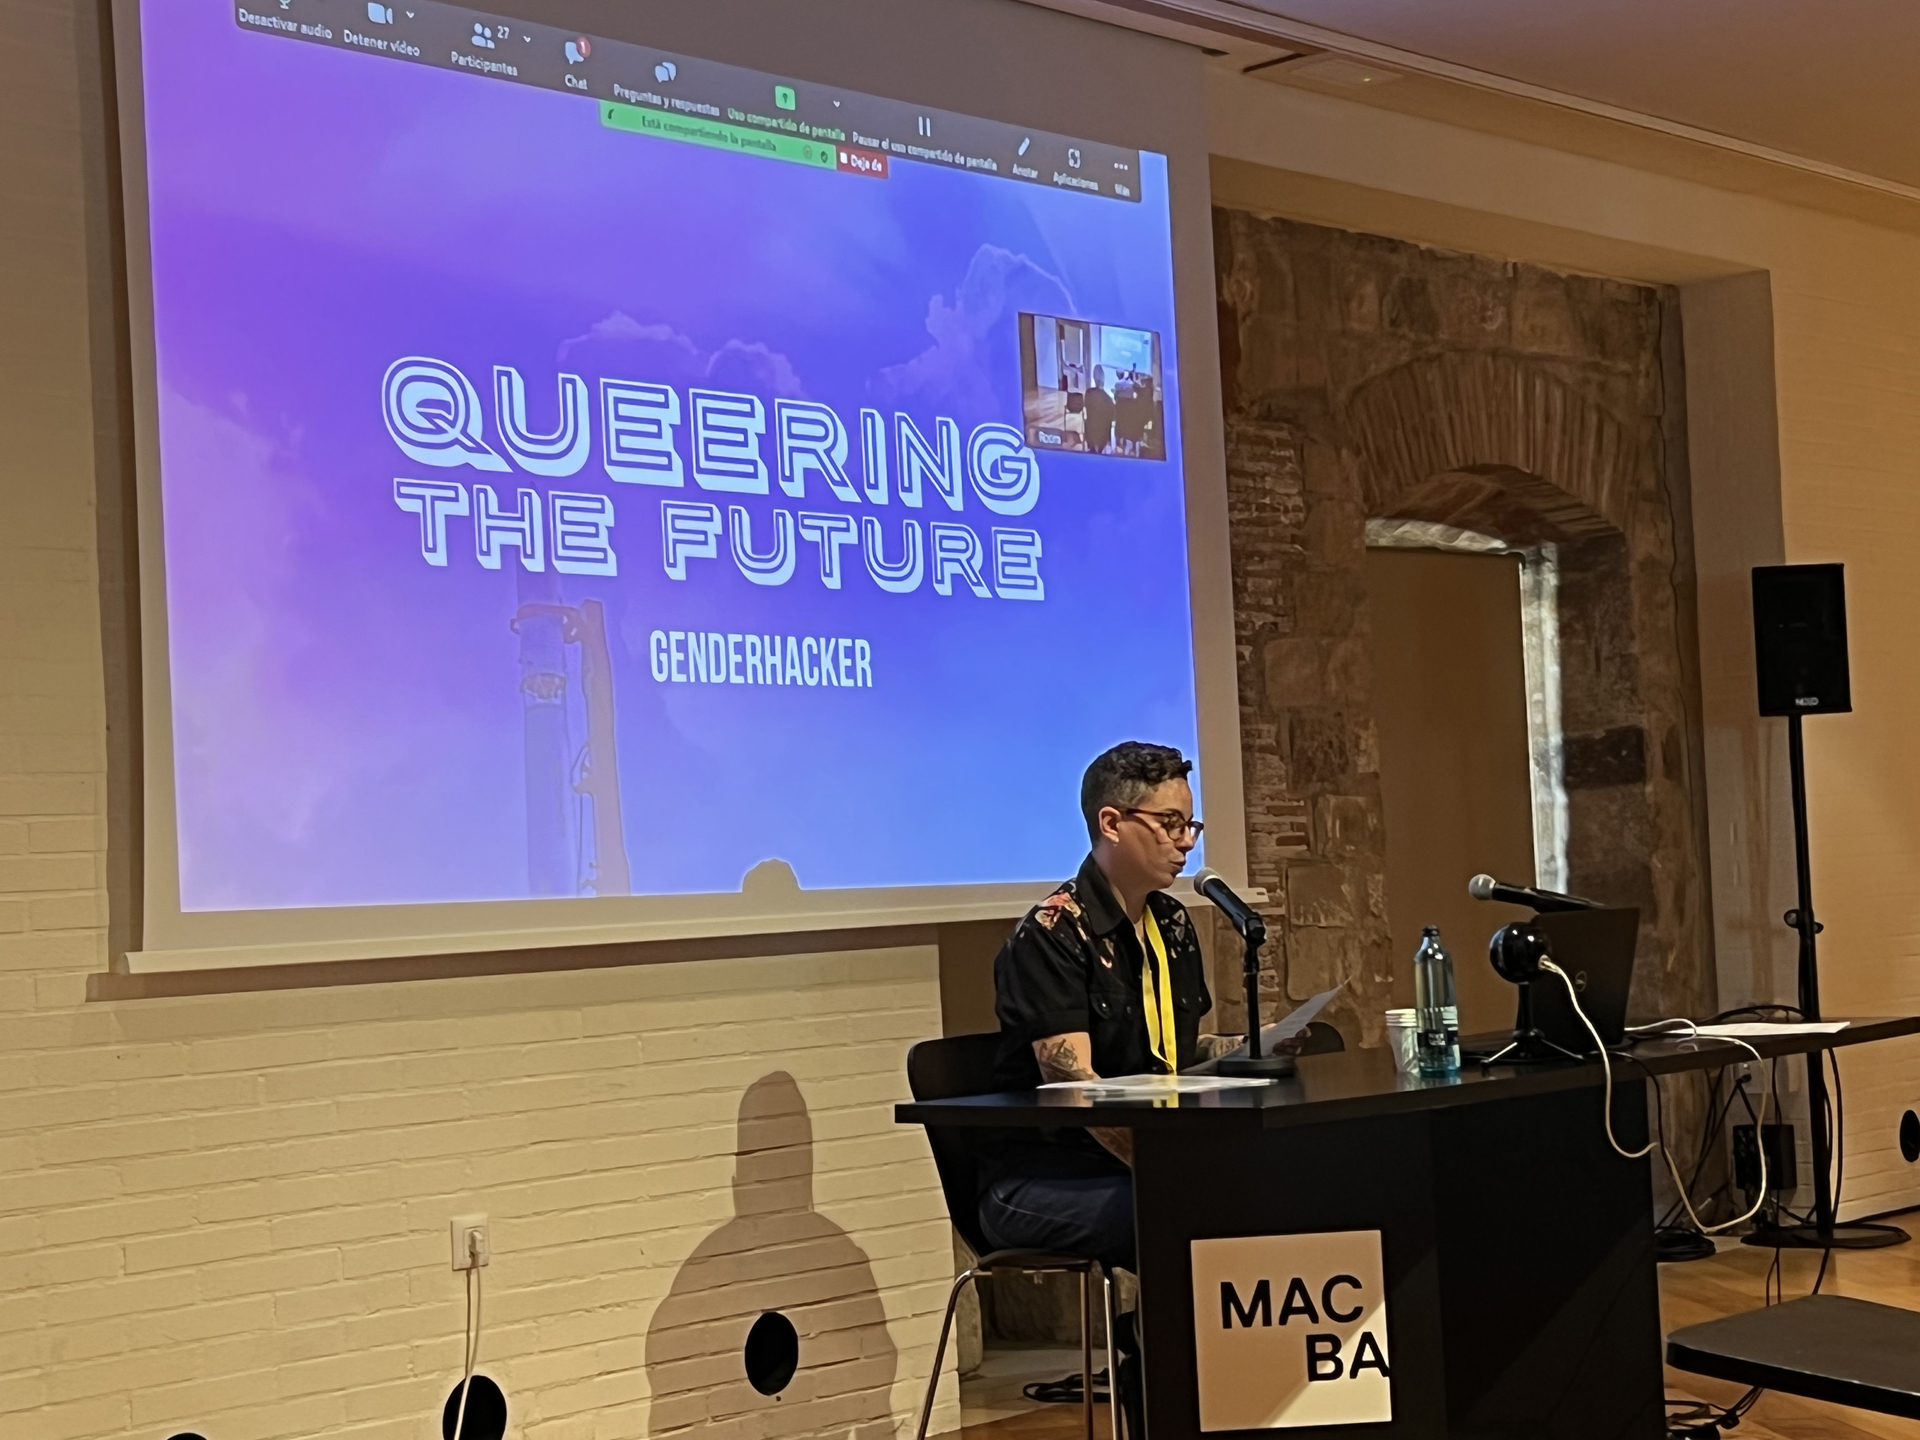 ©ISEA2022: 27th International Symposium on Electronic Art, Diego Marchante, Gendernaut. Queering the future